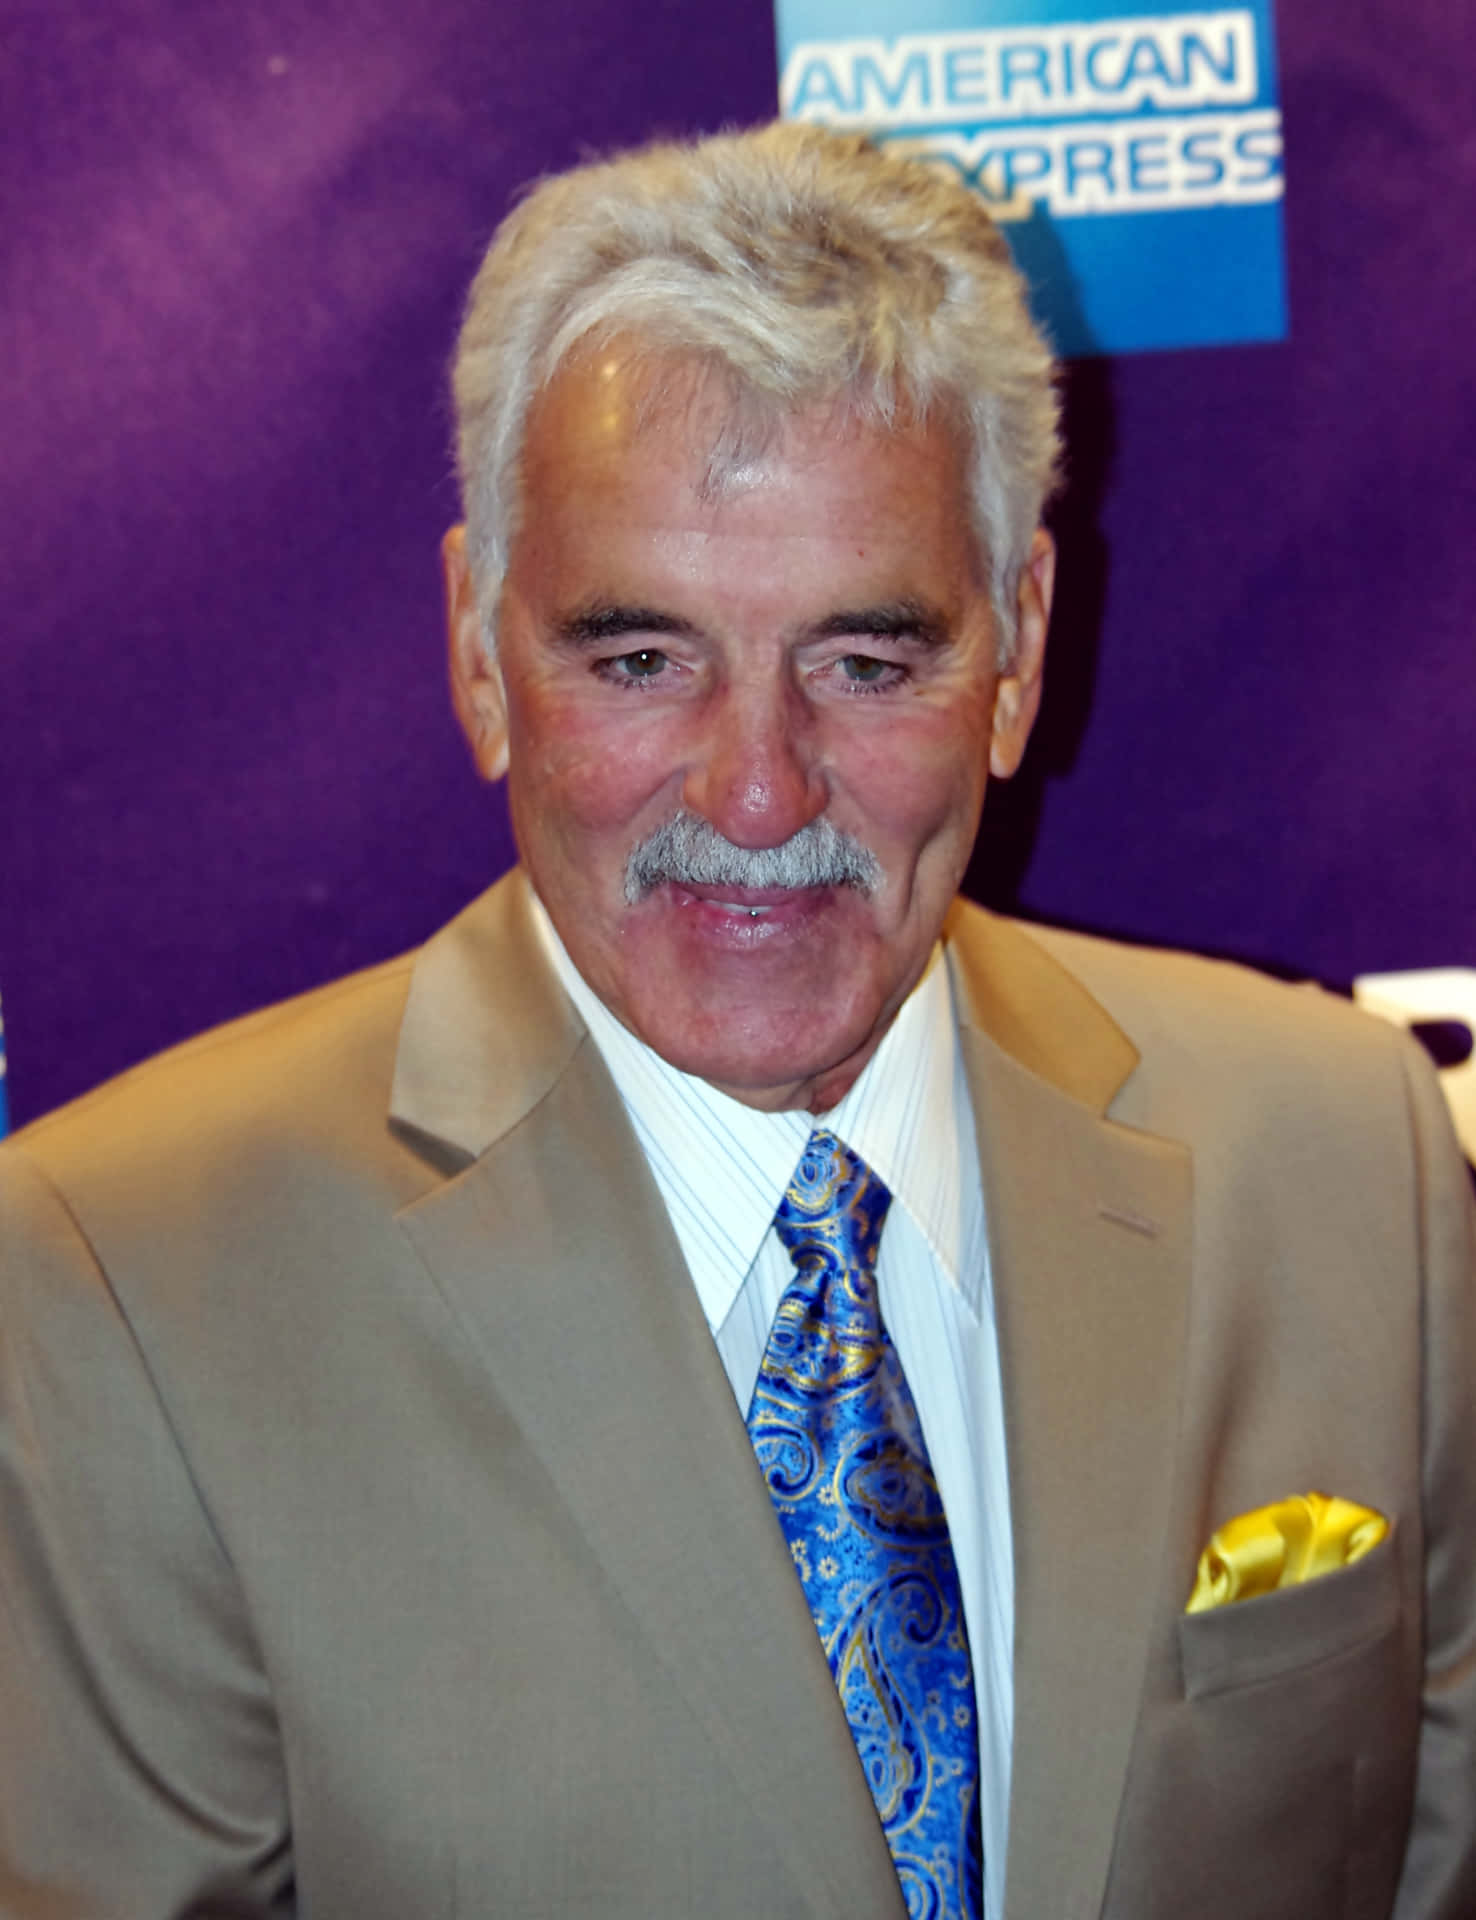 Dennis Farina in a suave and sophisticated pose Wallpaper